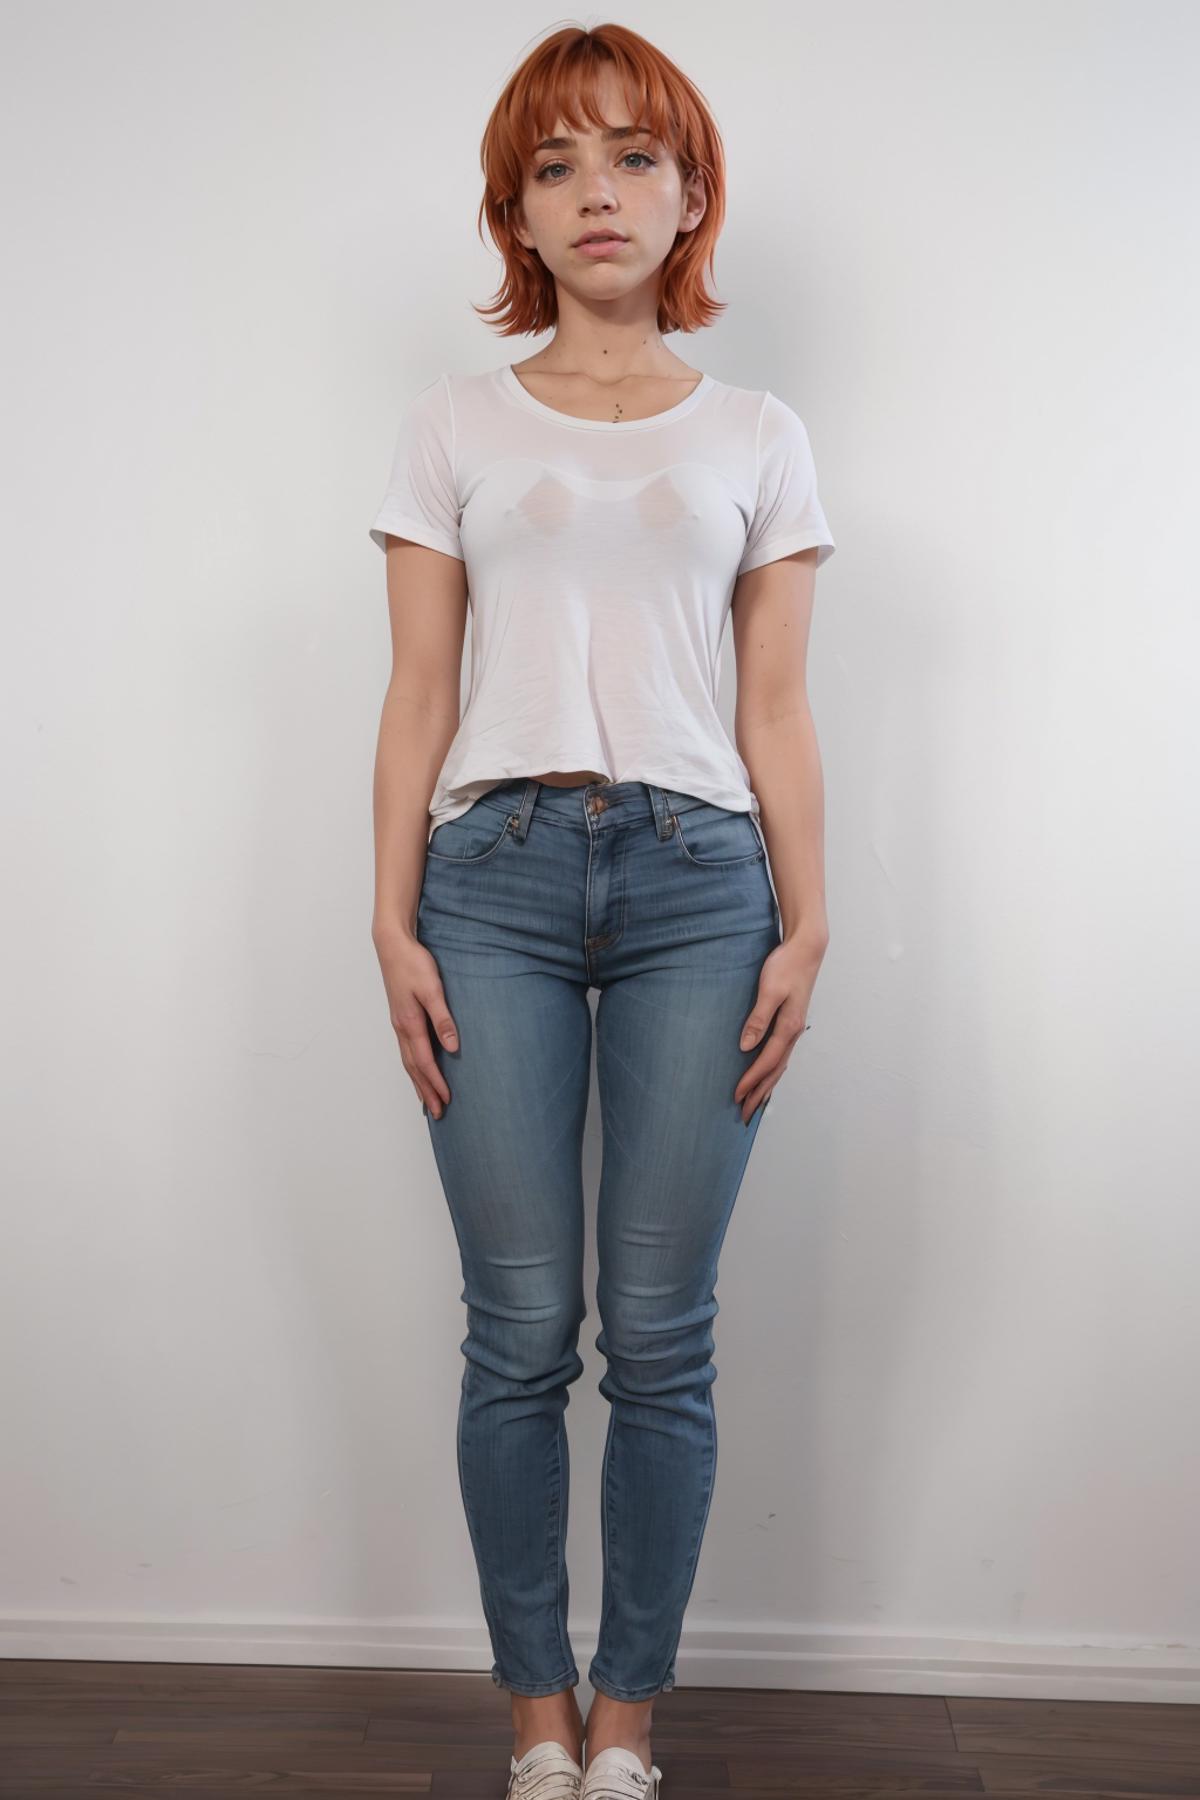 A woman wearing a white shirt and blue jeans standing against a white wall.